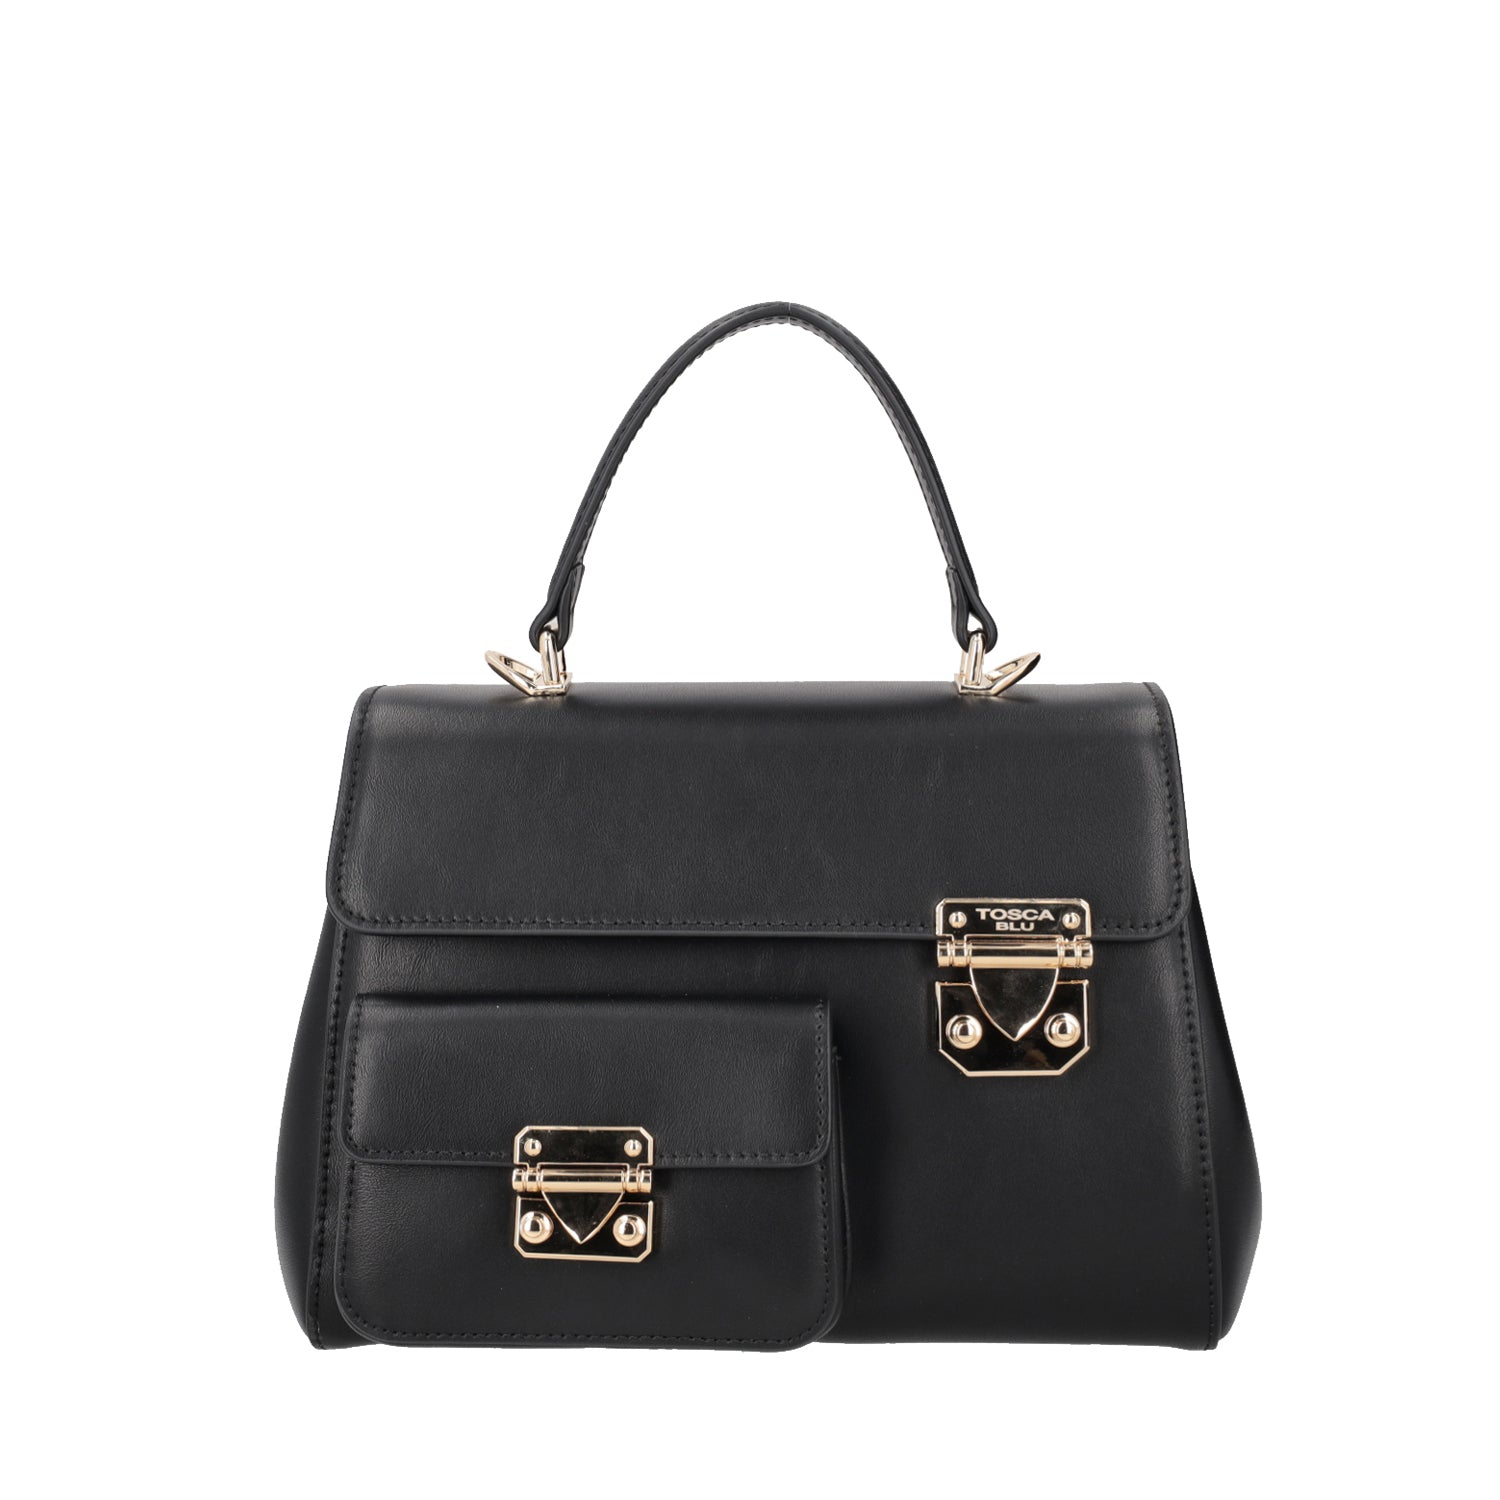 BLACK ANEMONE HAND BAG WITH GOLDEN ACCESSORIES